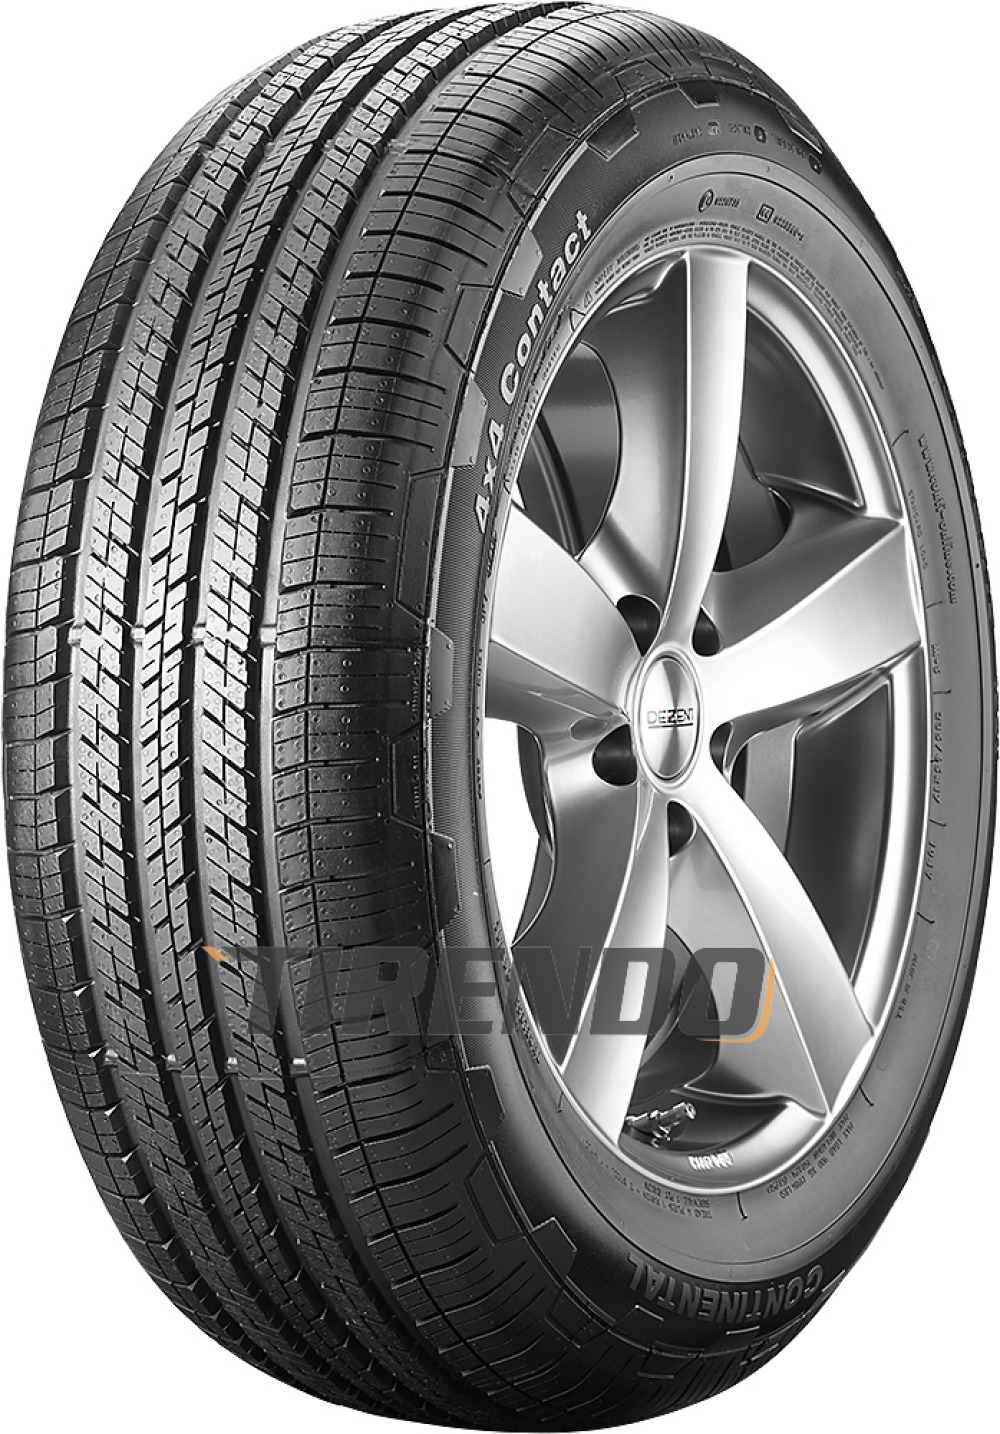 Image of Continental 4X4 Contact ( 195/80 R15 96H )